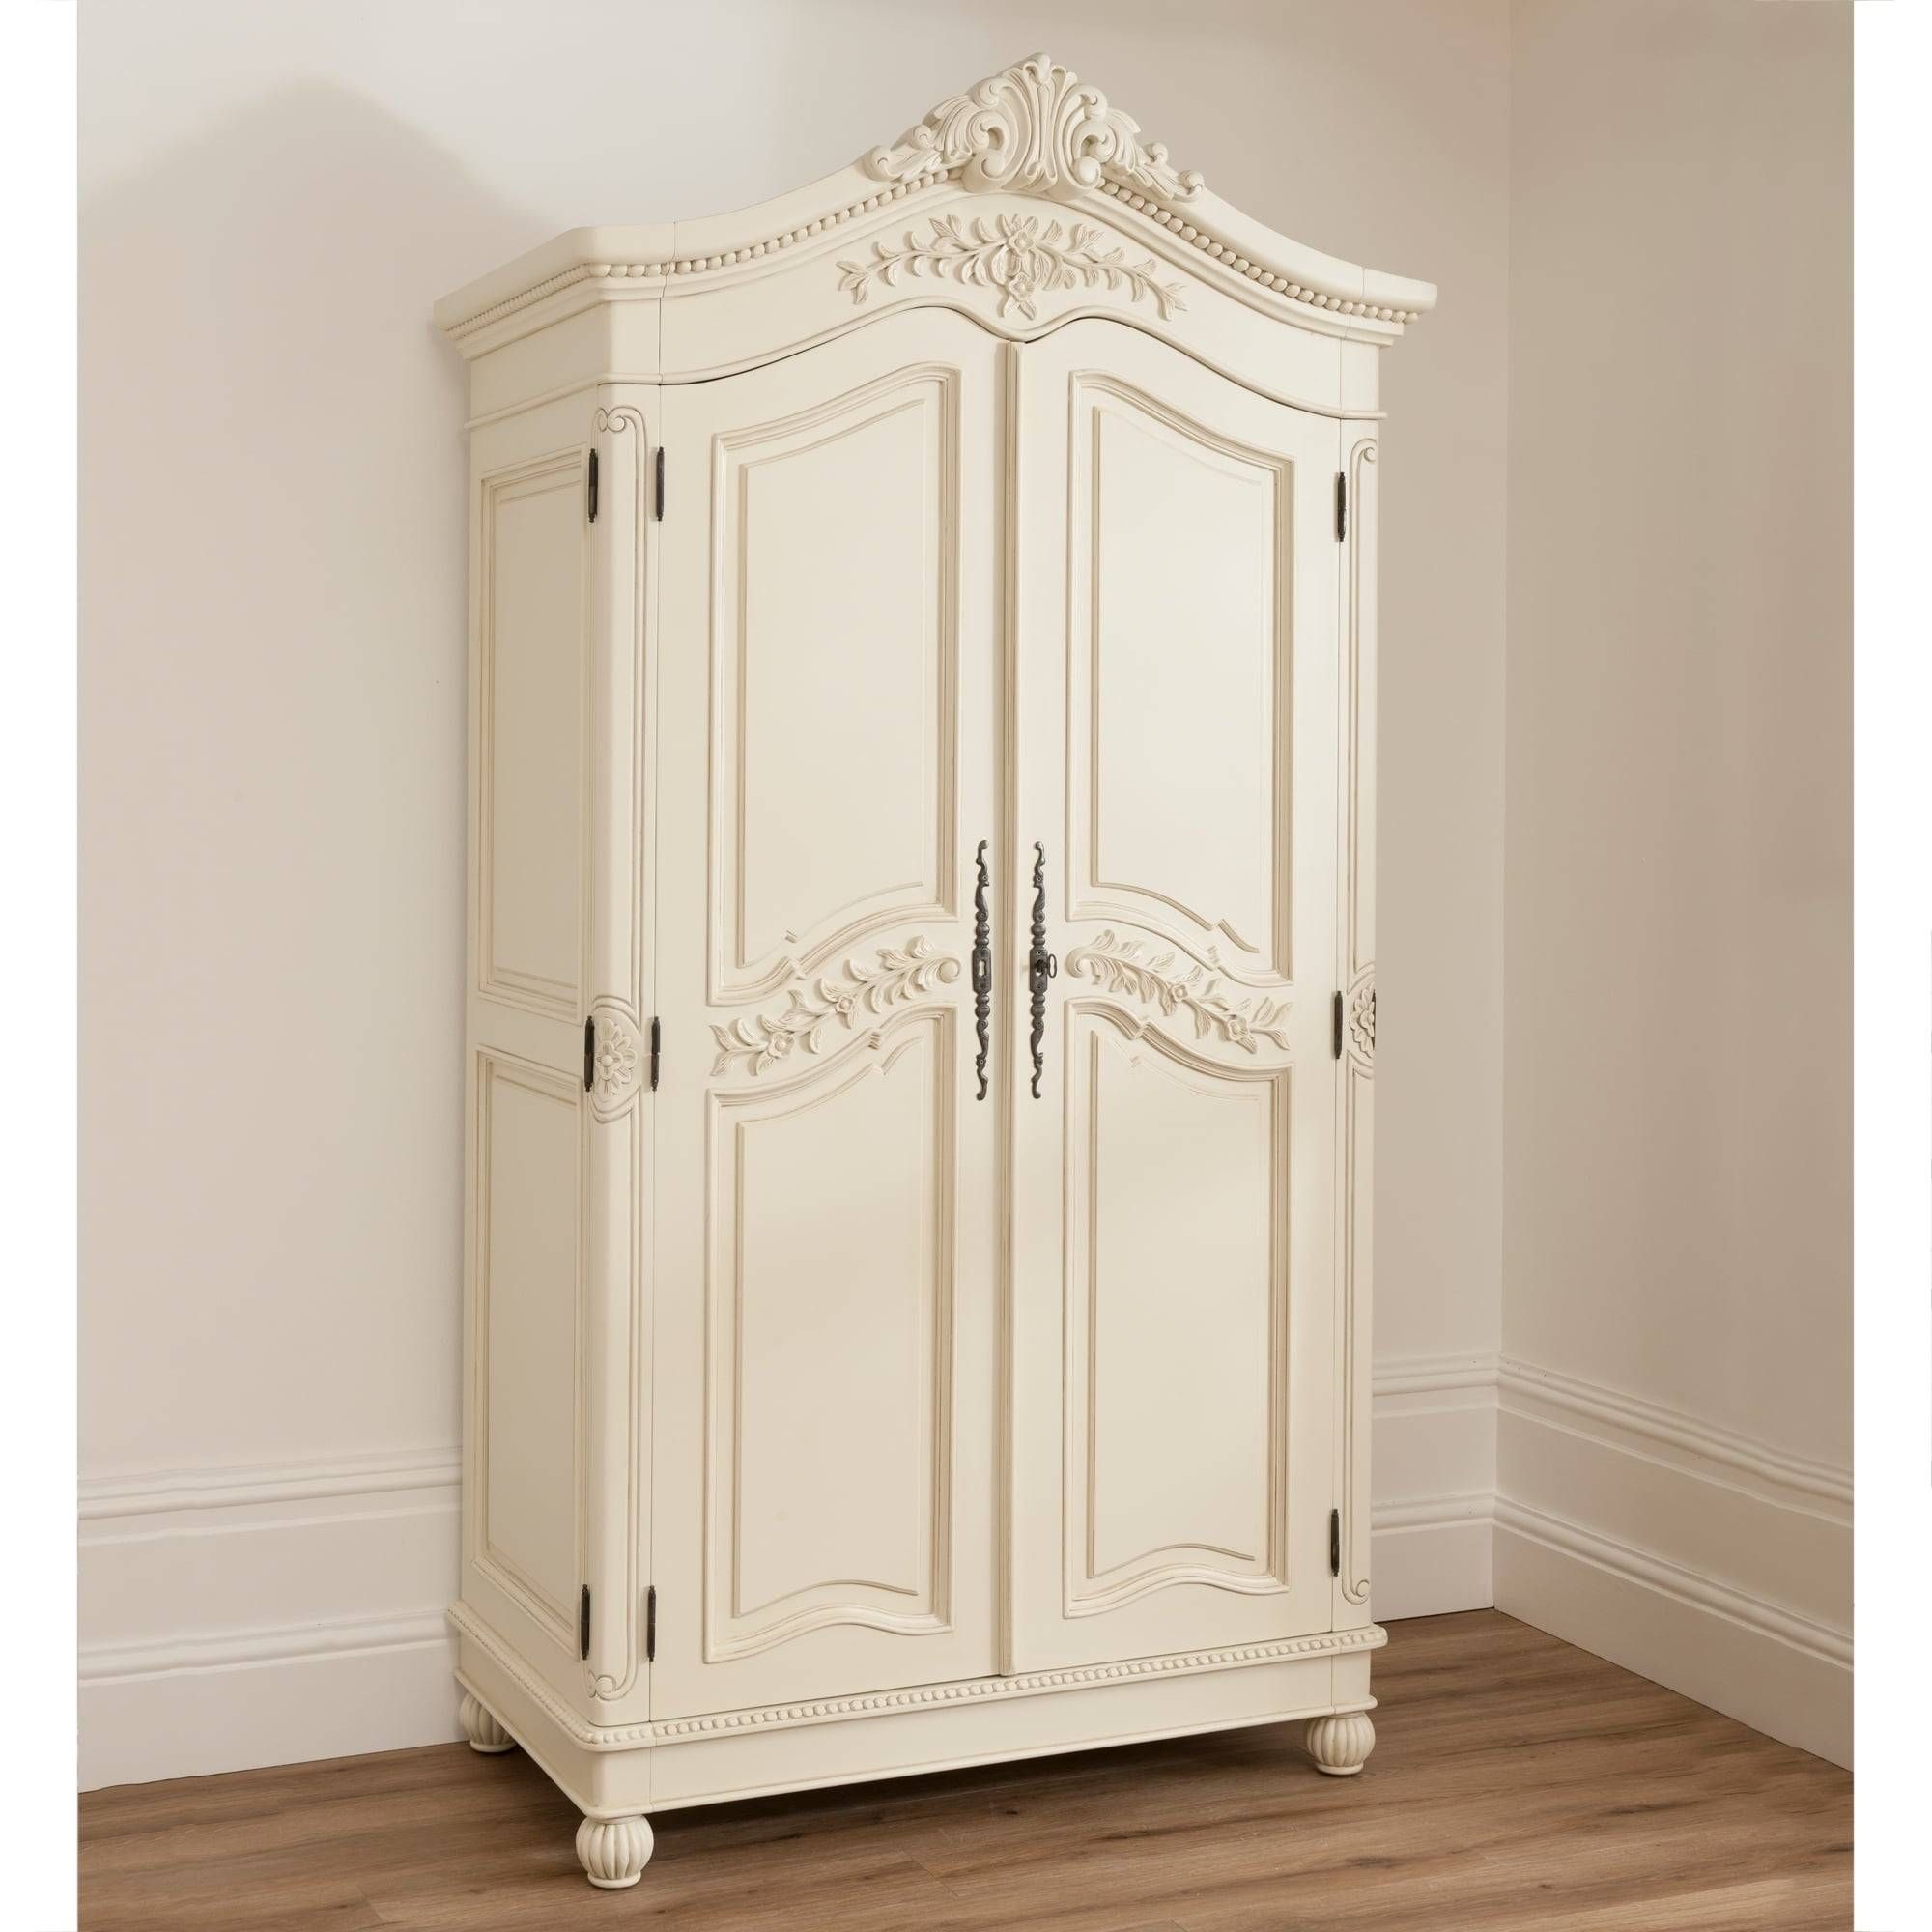 Bordeaux Ivory Shabby Chic Wardrobe | Shabby Chic Furniture Throughout Ivory Wardrobes (View 1 of 15)